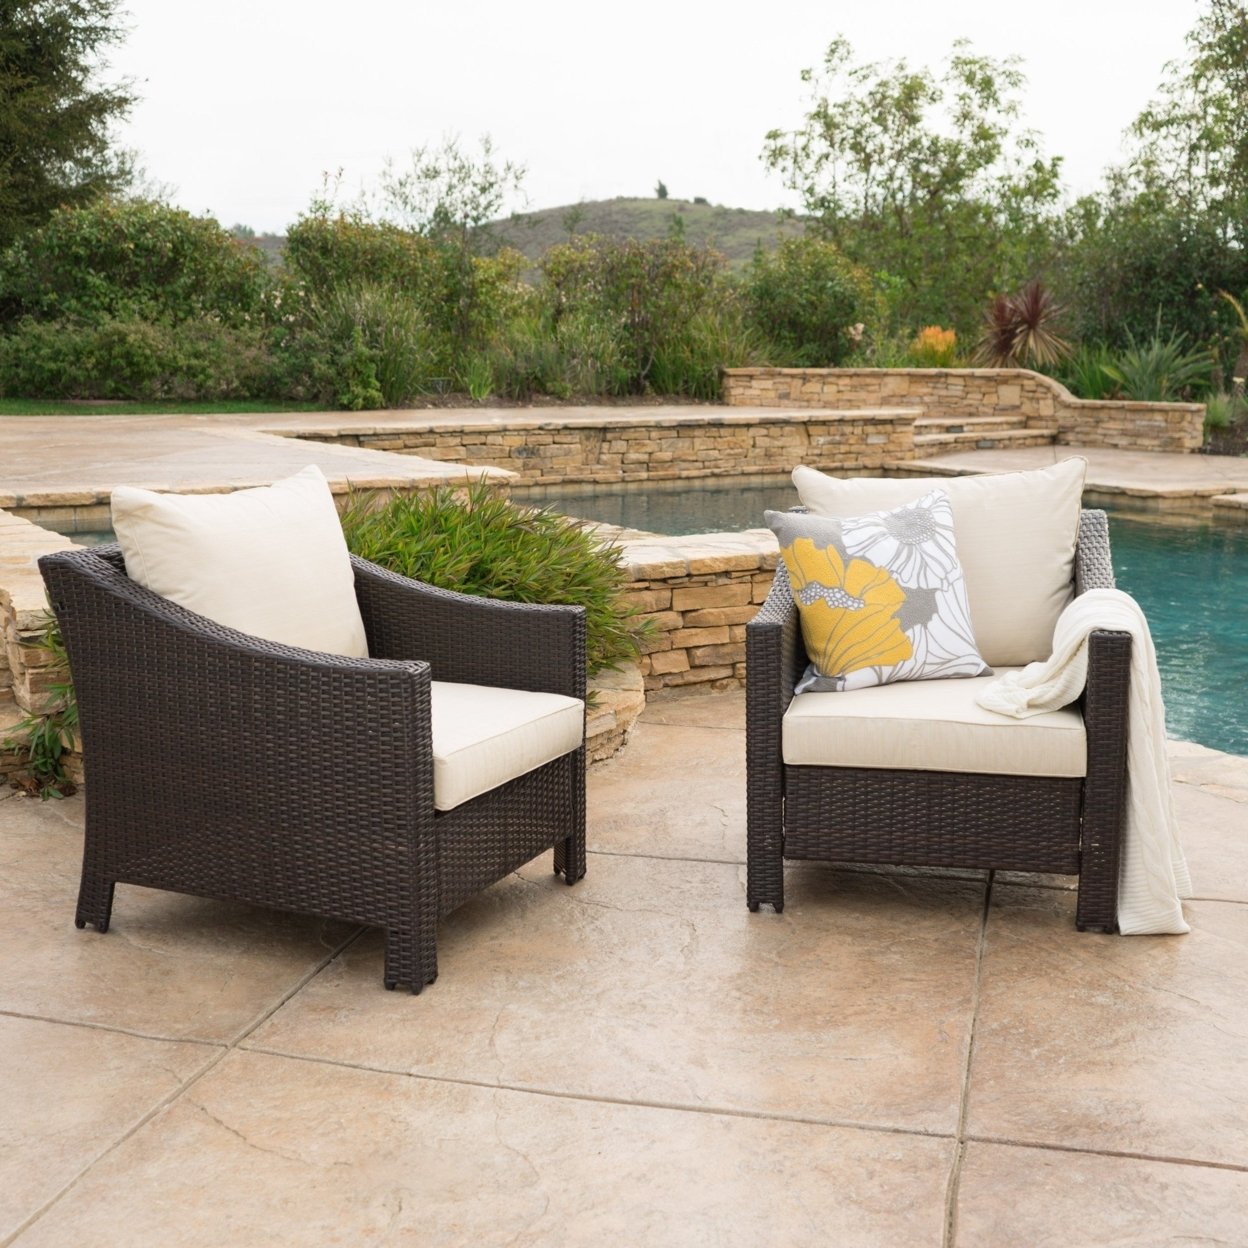 Cortez Outdoor Wicker Club Chair With Water Resistant Cushions (Set Of 2) - Gray/Silver